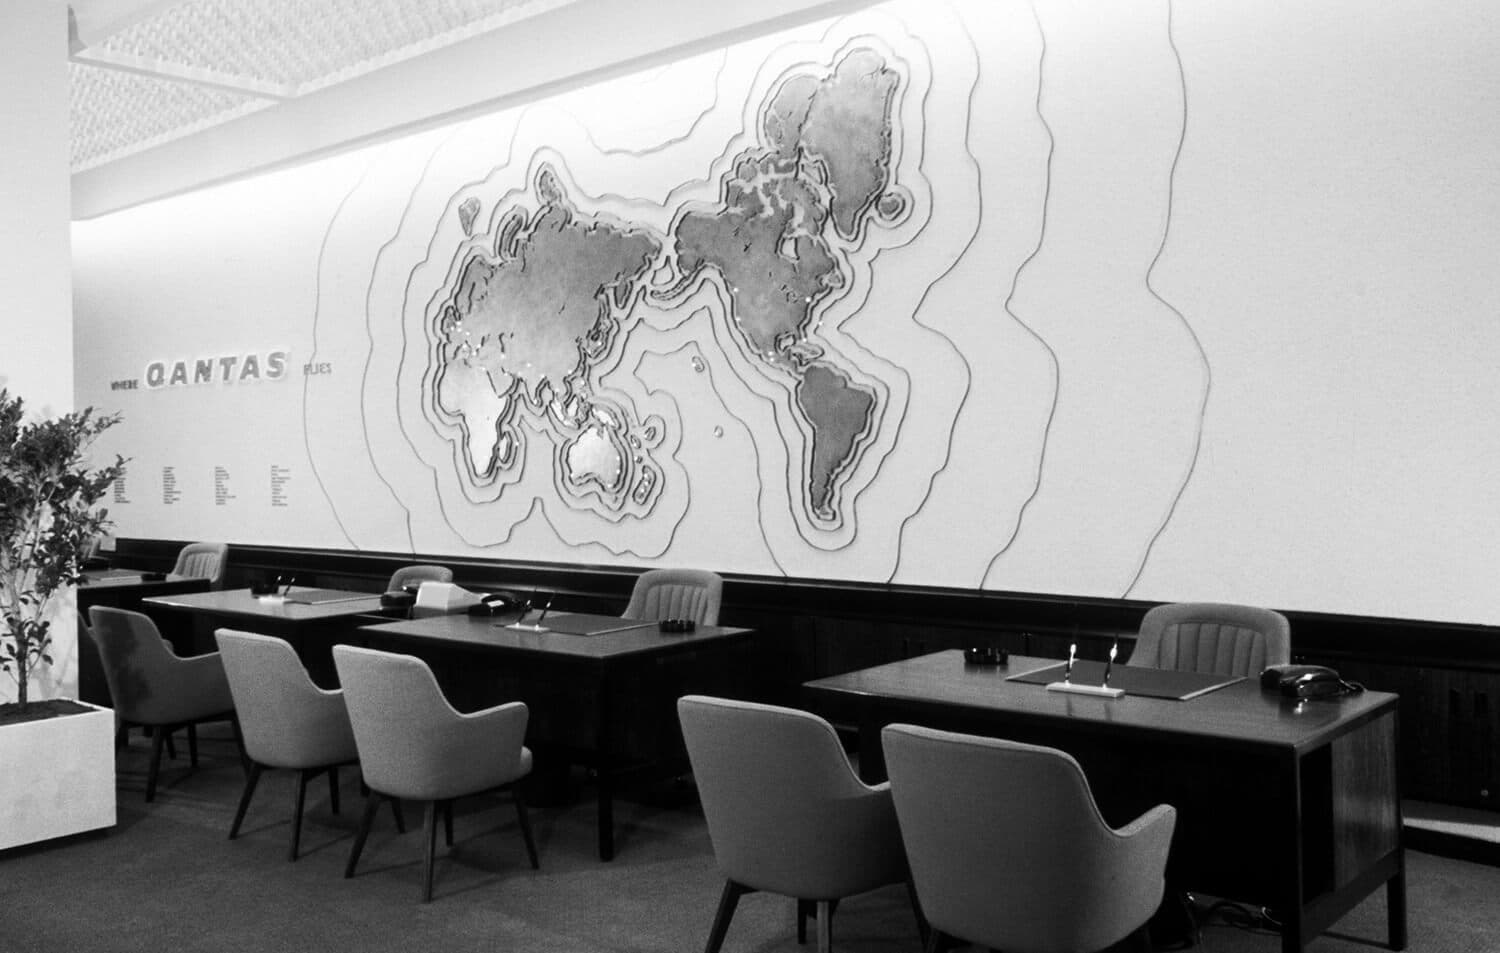 Large map detail in Qantas lounge with dining area below